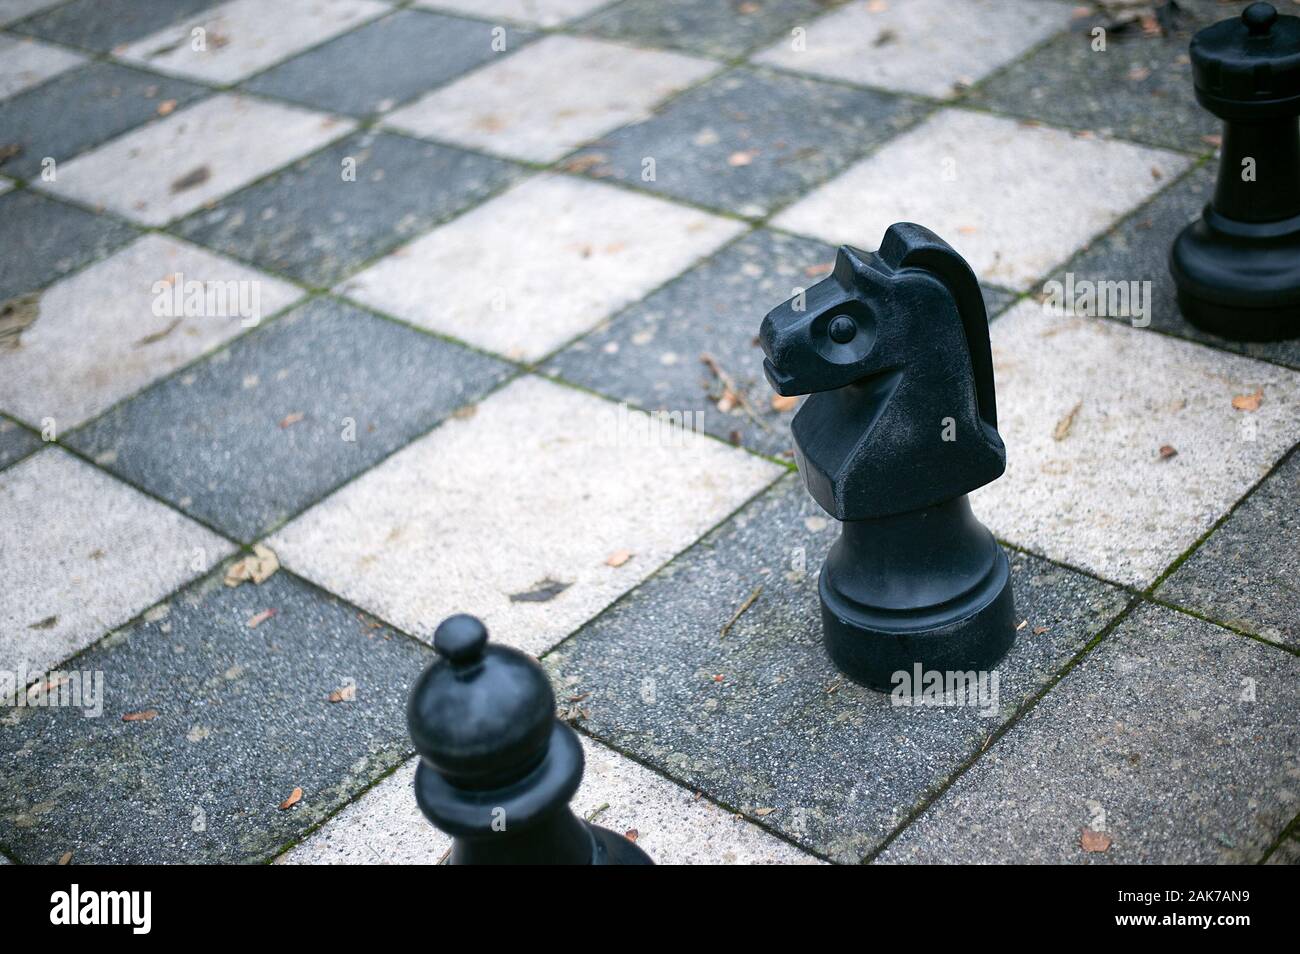 A Chess Board, a Pawn, a Transformation - CityU of Seattle